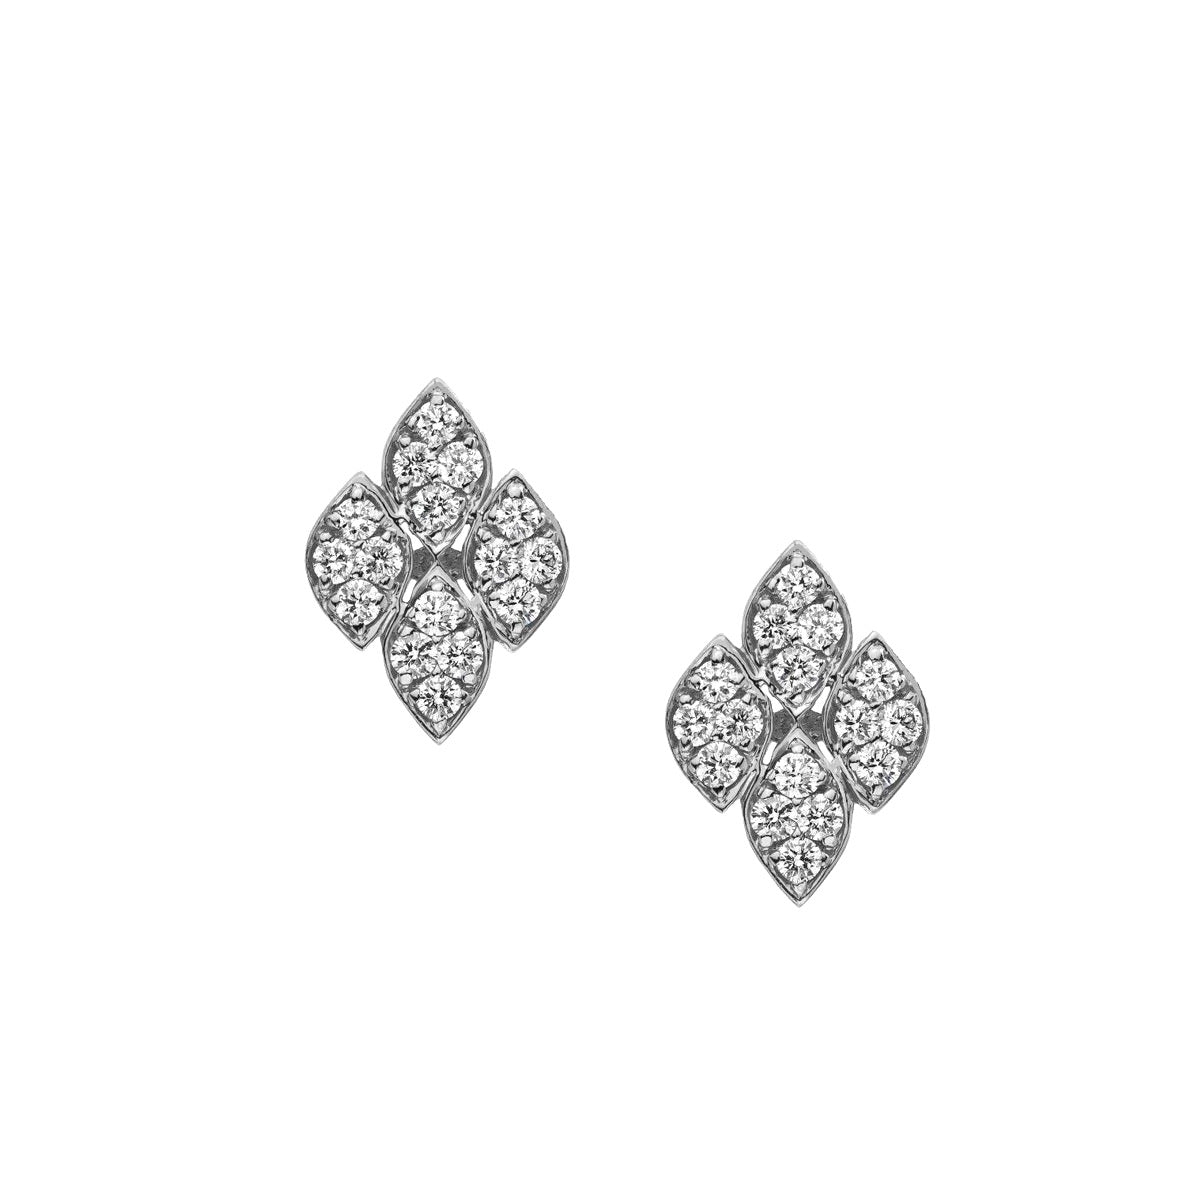 Darcy CZ Diamond and Pearl Stud Earrings, Silver